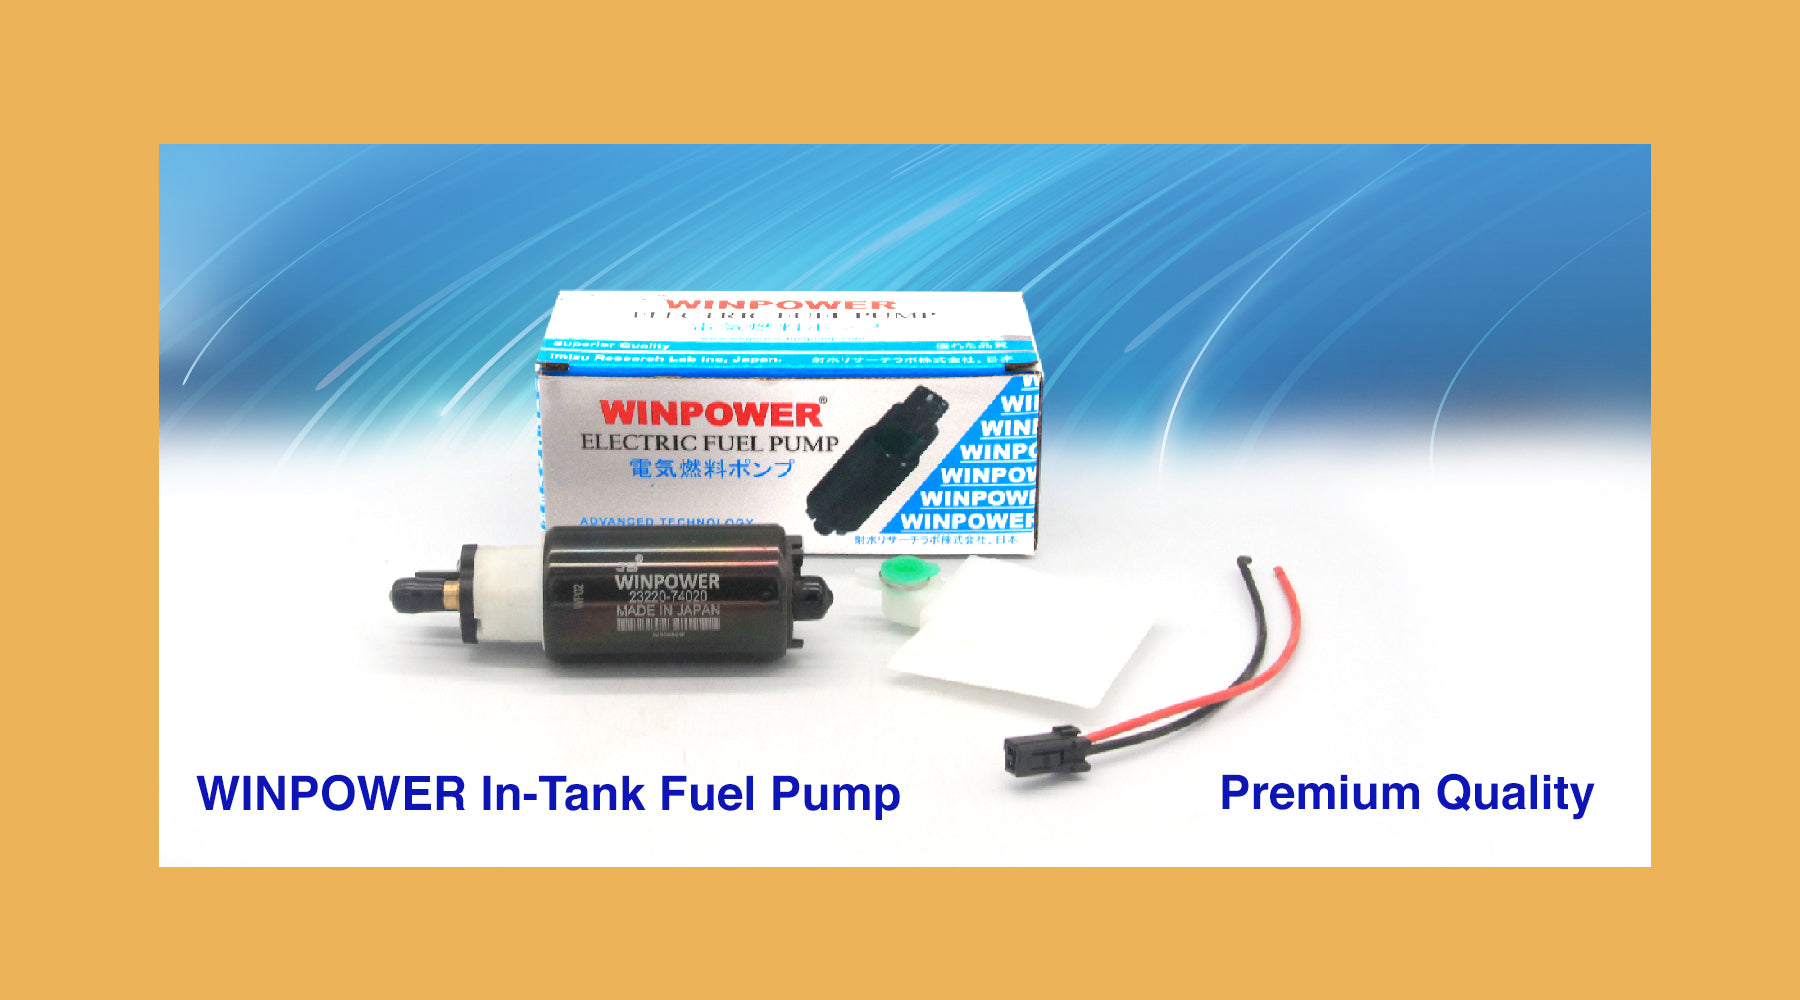 WINPOWER In-Tank Fuel Pump: Innovation and Excellence in Automotive Fuel Systems